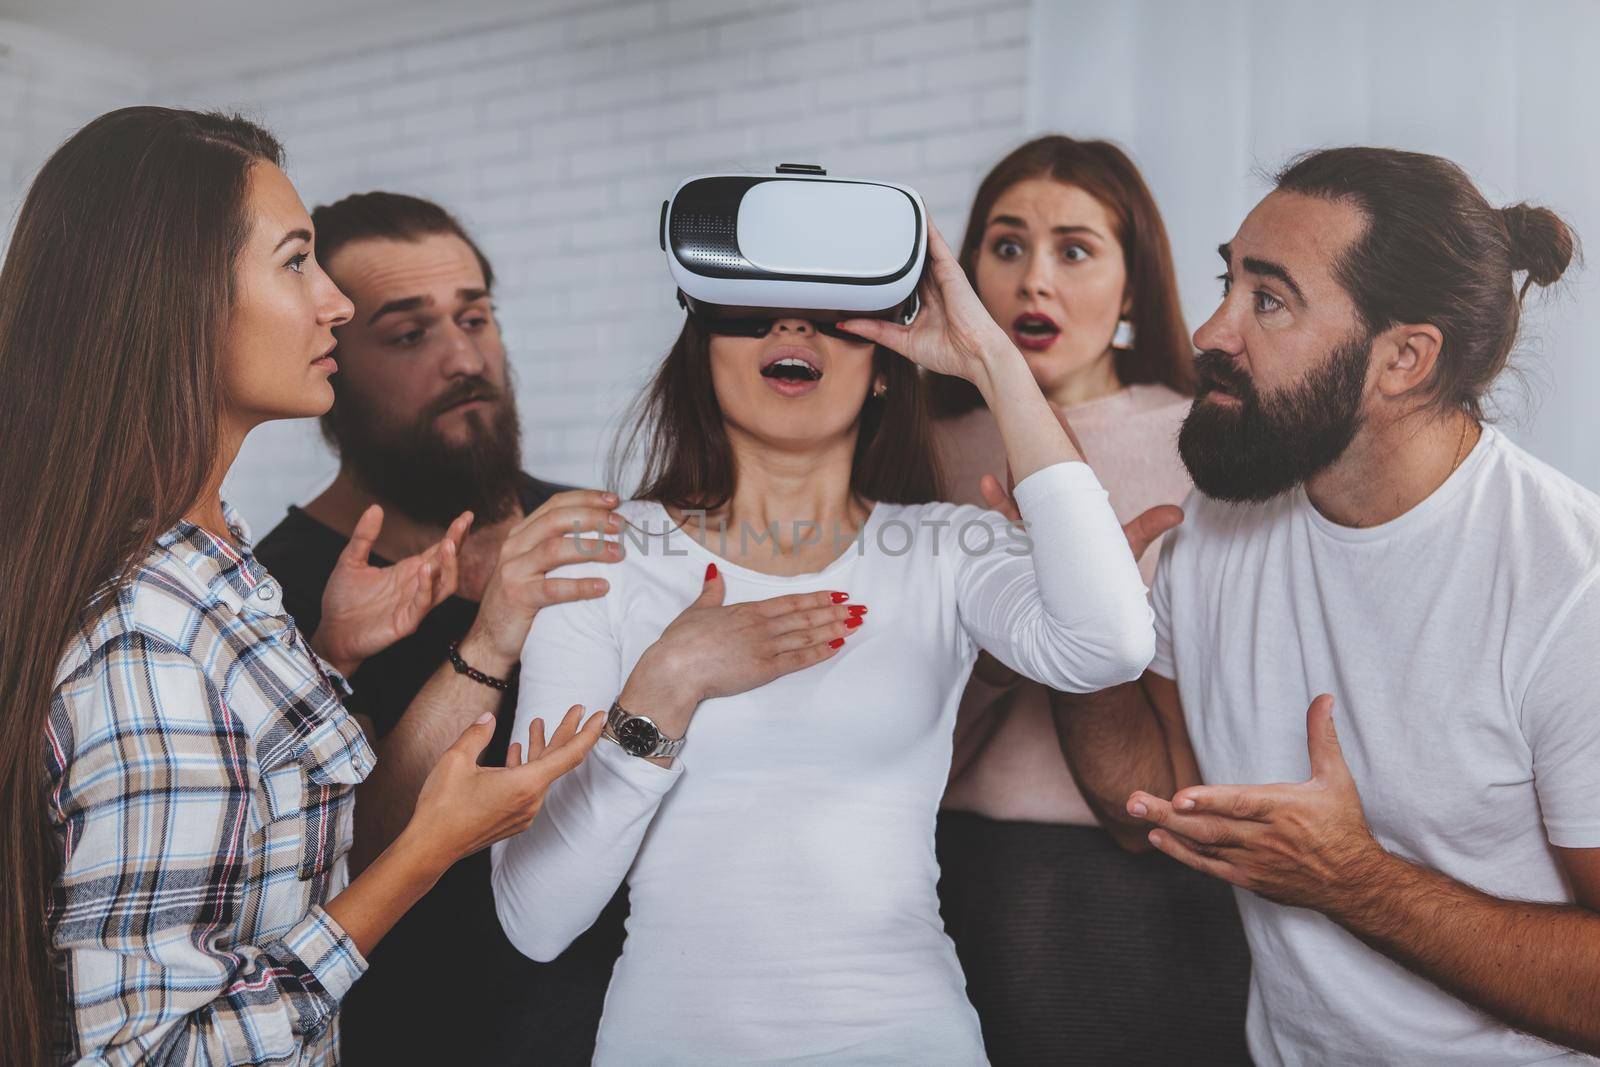 Young woman looking overwhelmed and shocked, wearing virtual reality headset, her friends surrounding her. Group of businesspeople working together on innovative project, using vr goggles